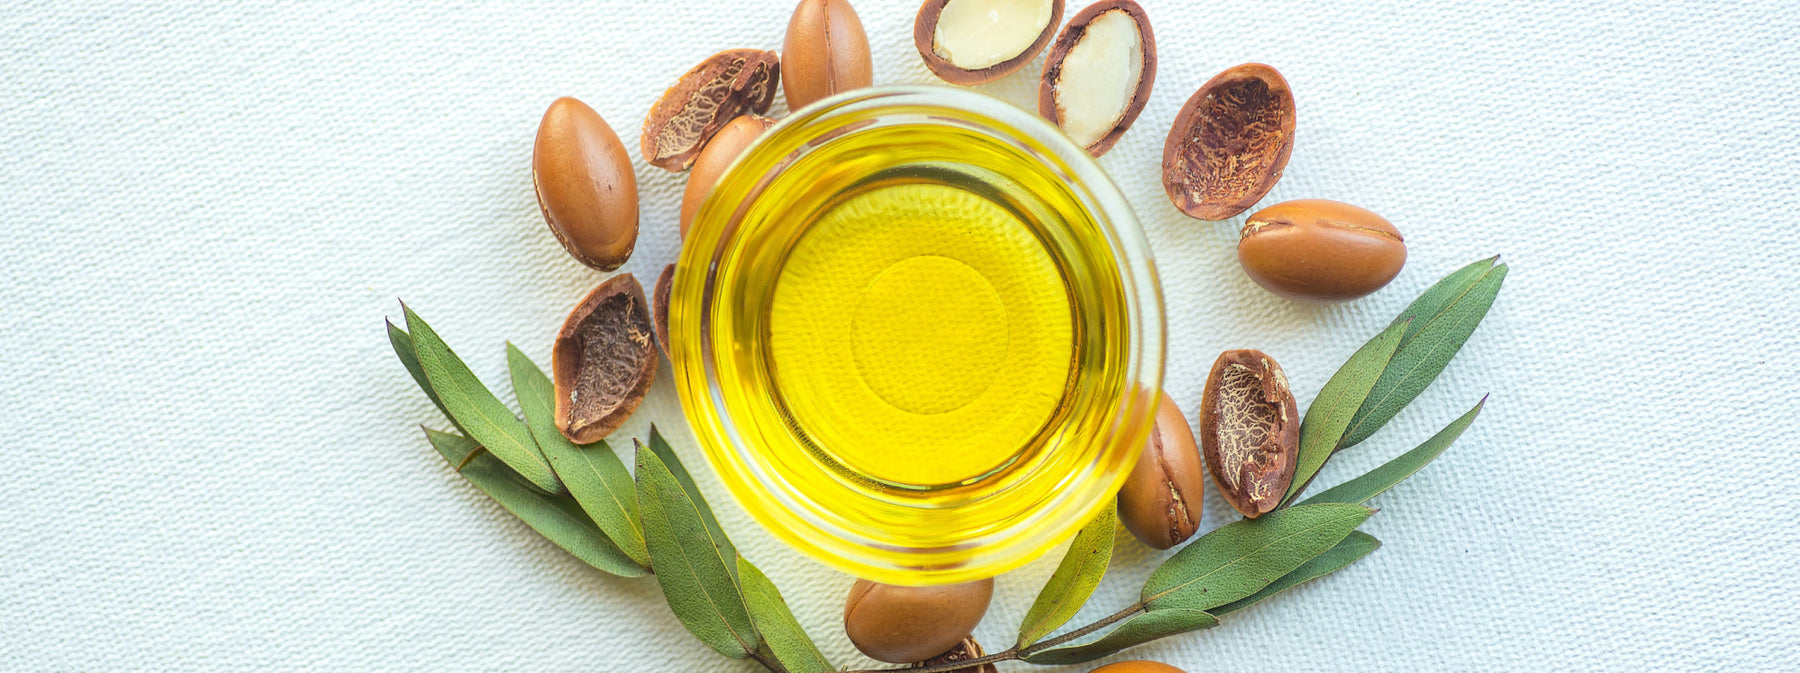 argan oil surrounded by argan seeds